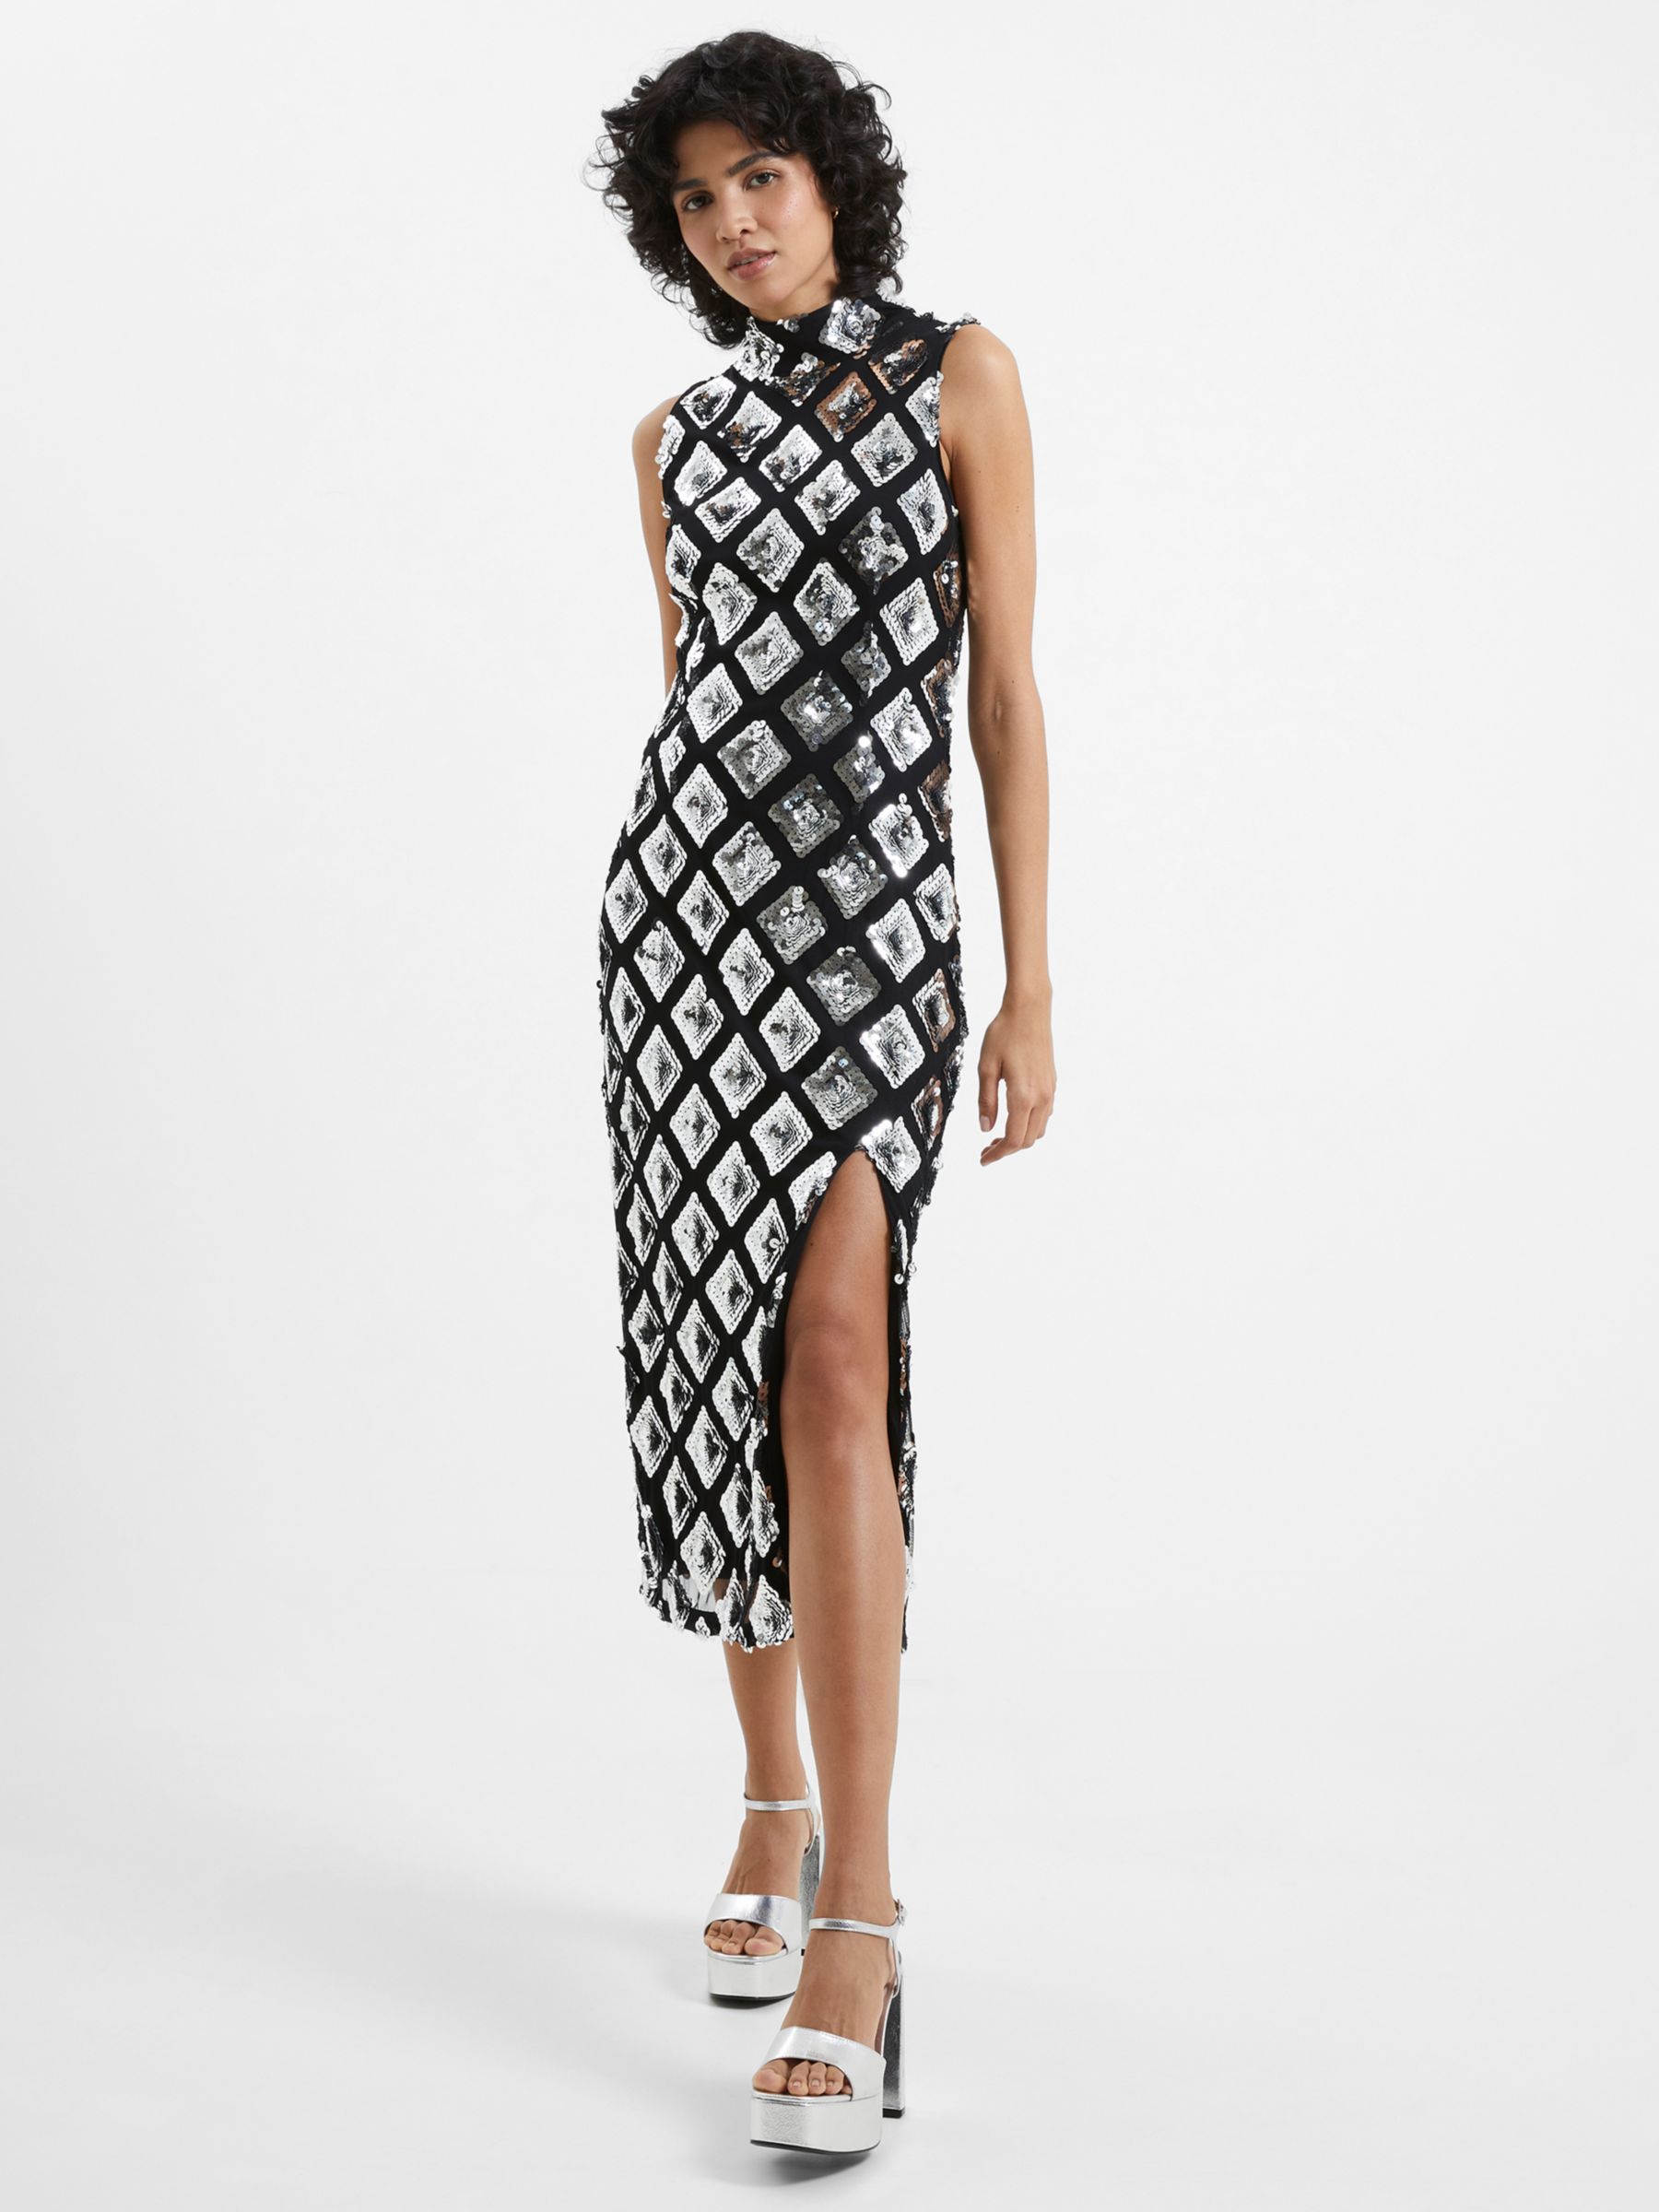 French Connection Axel Embellished Dress, Black/Silver at John Lewis ...